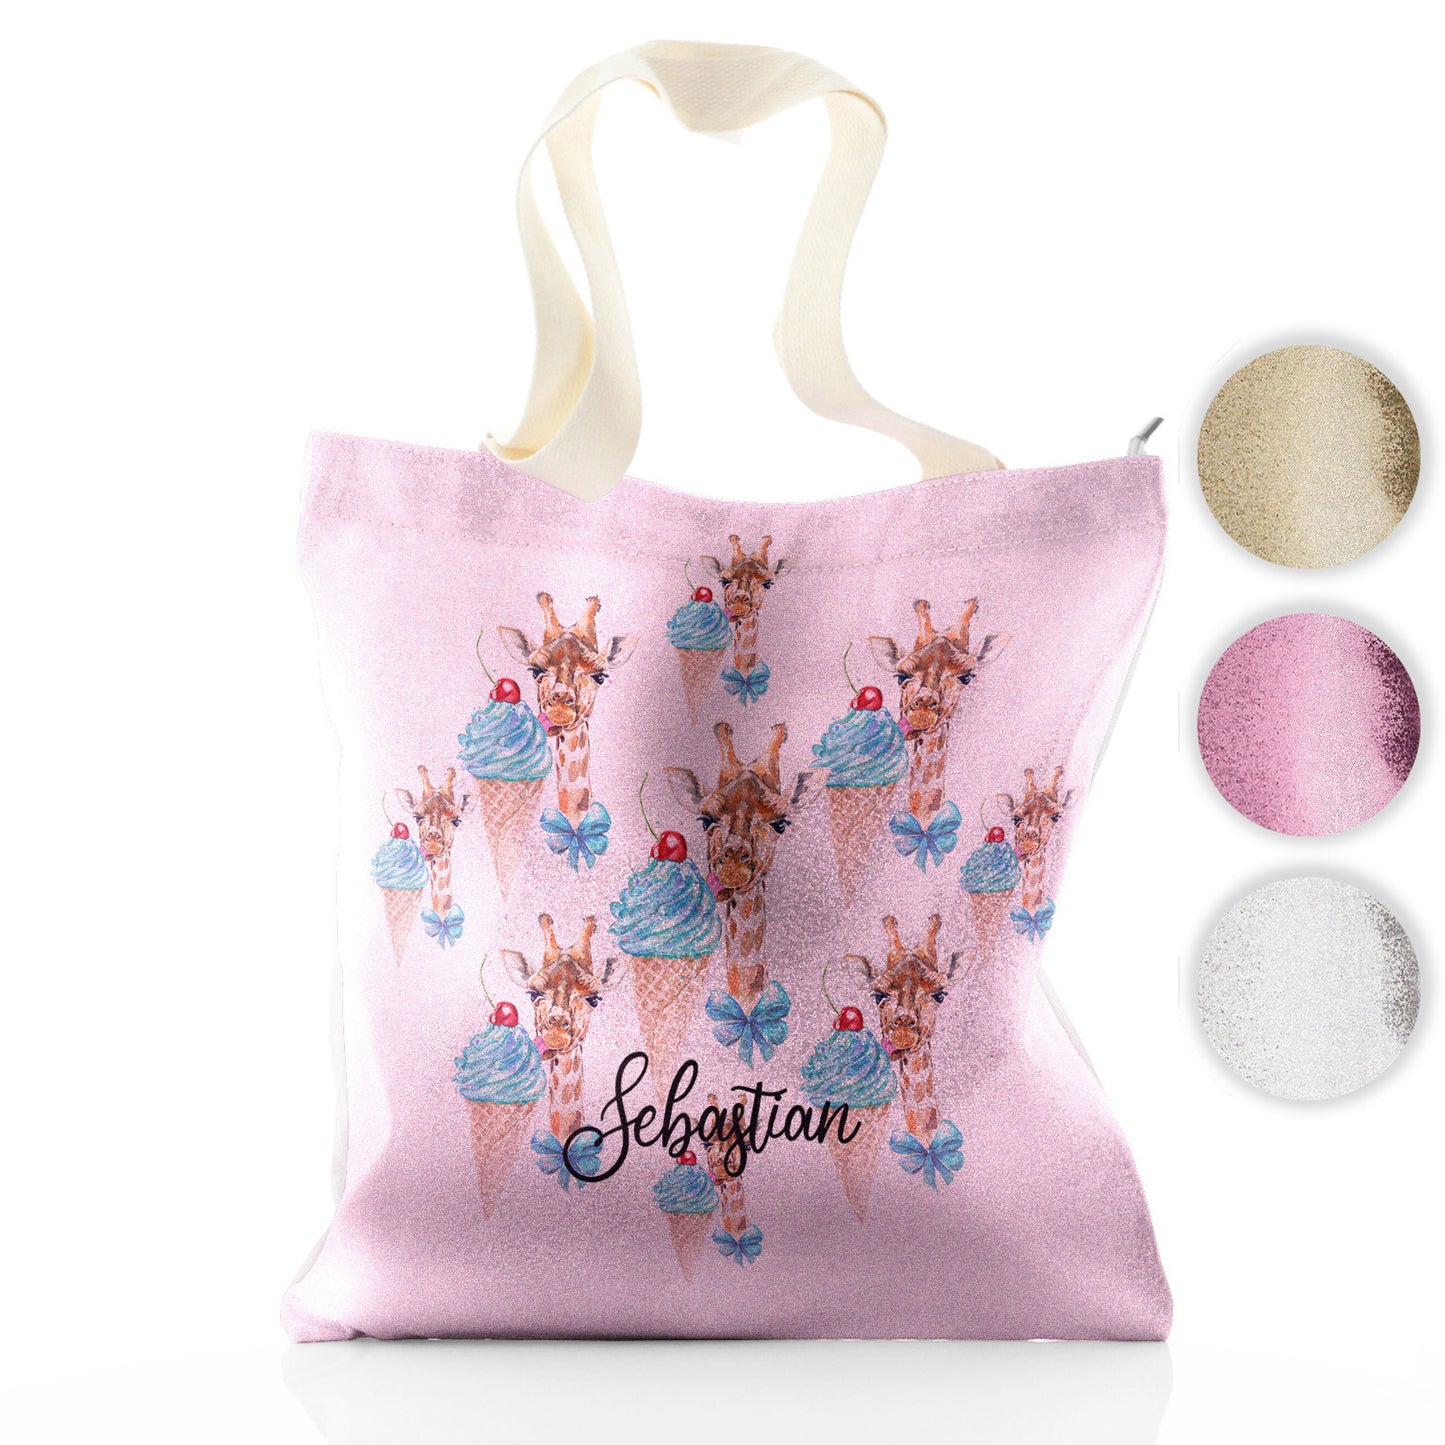 Personalised Glitter Tote Bag with Giraffe Blue Ice creams and Cute Text